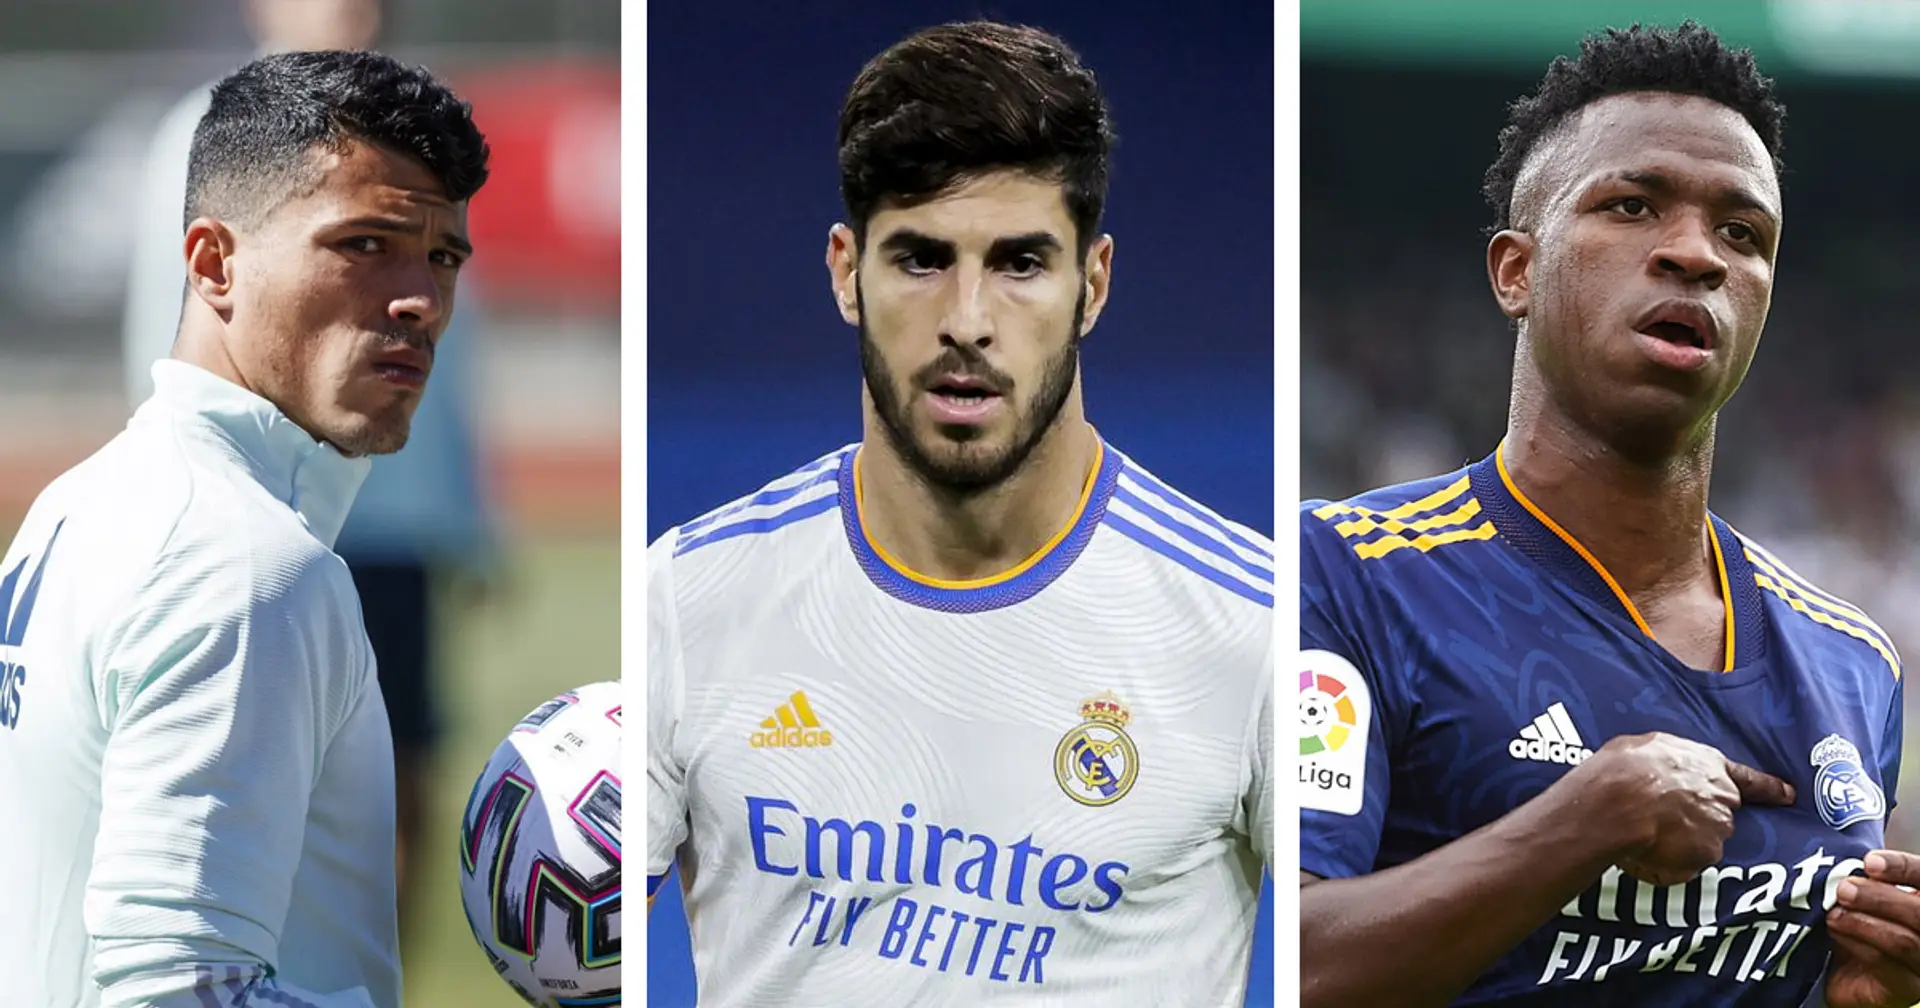 Real Madrid want to extend Asensio contract and 3 more big stories you might've missed